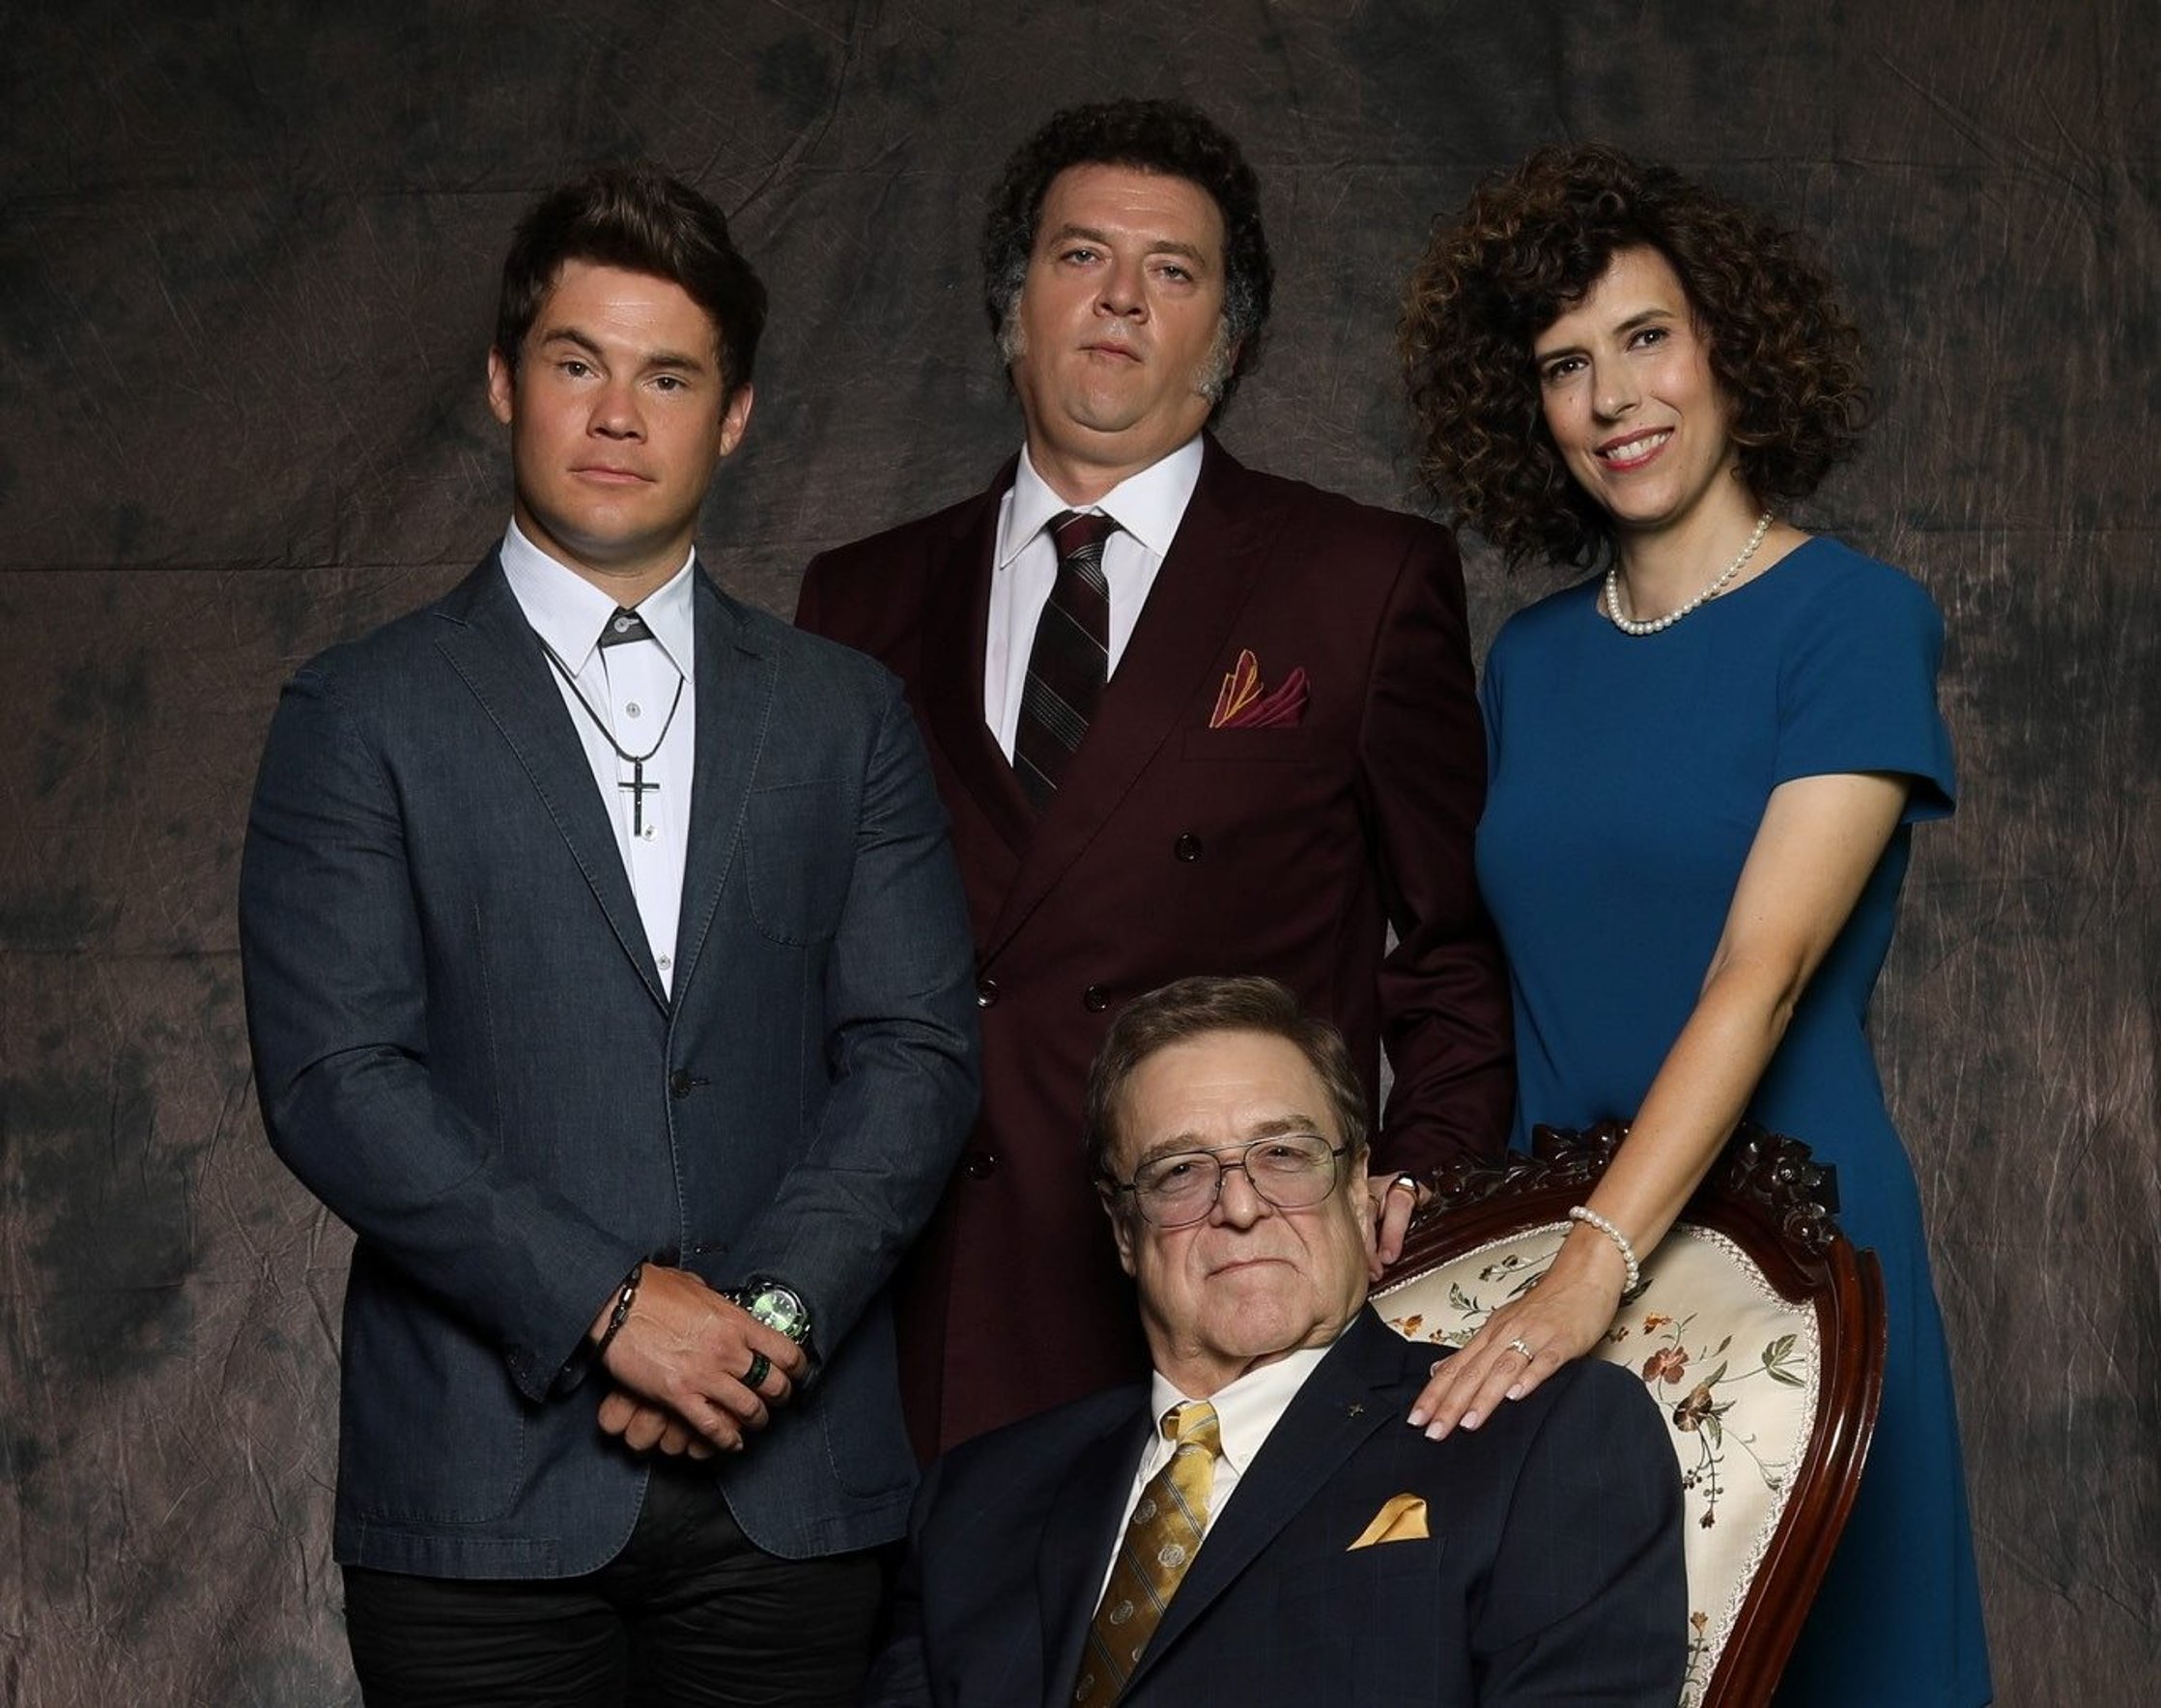 Casting the HBO TV series The Righteous Gemstones